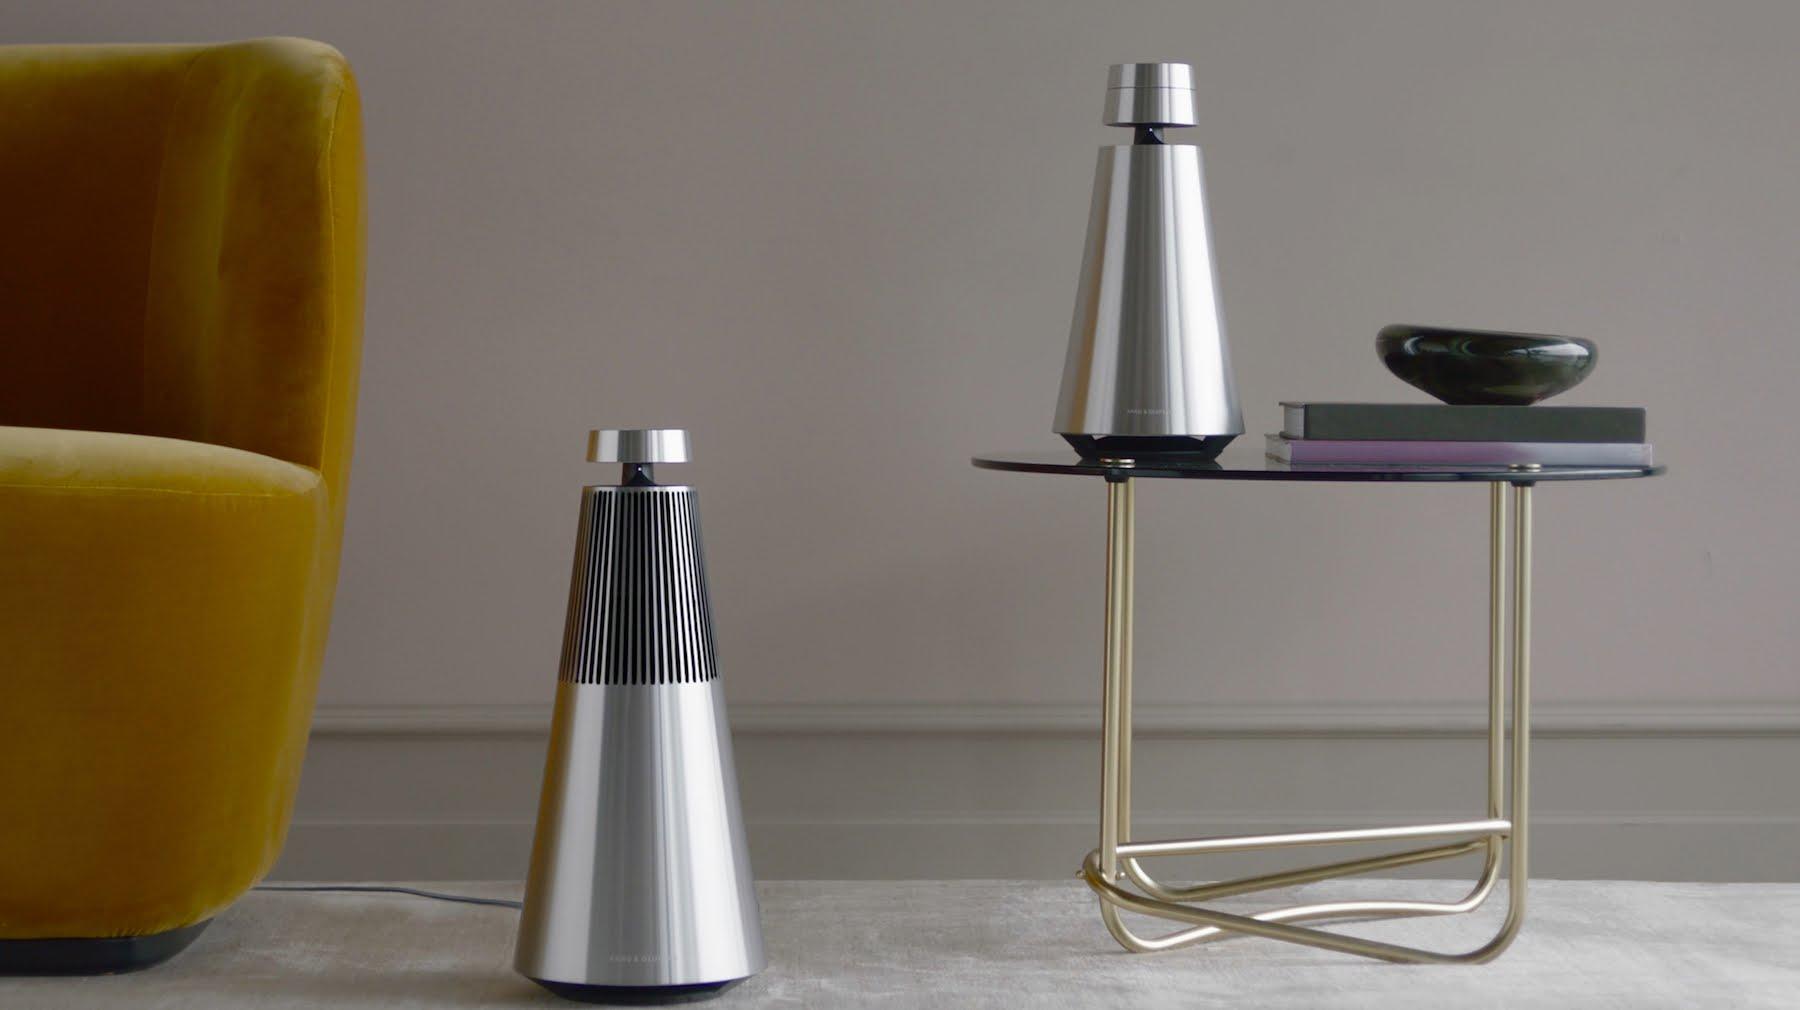 The new Bang & Olufsen Beosound 1 and 2 speakers get built-in Google